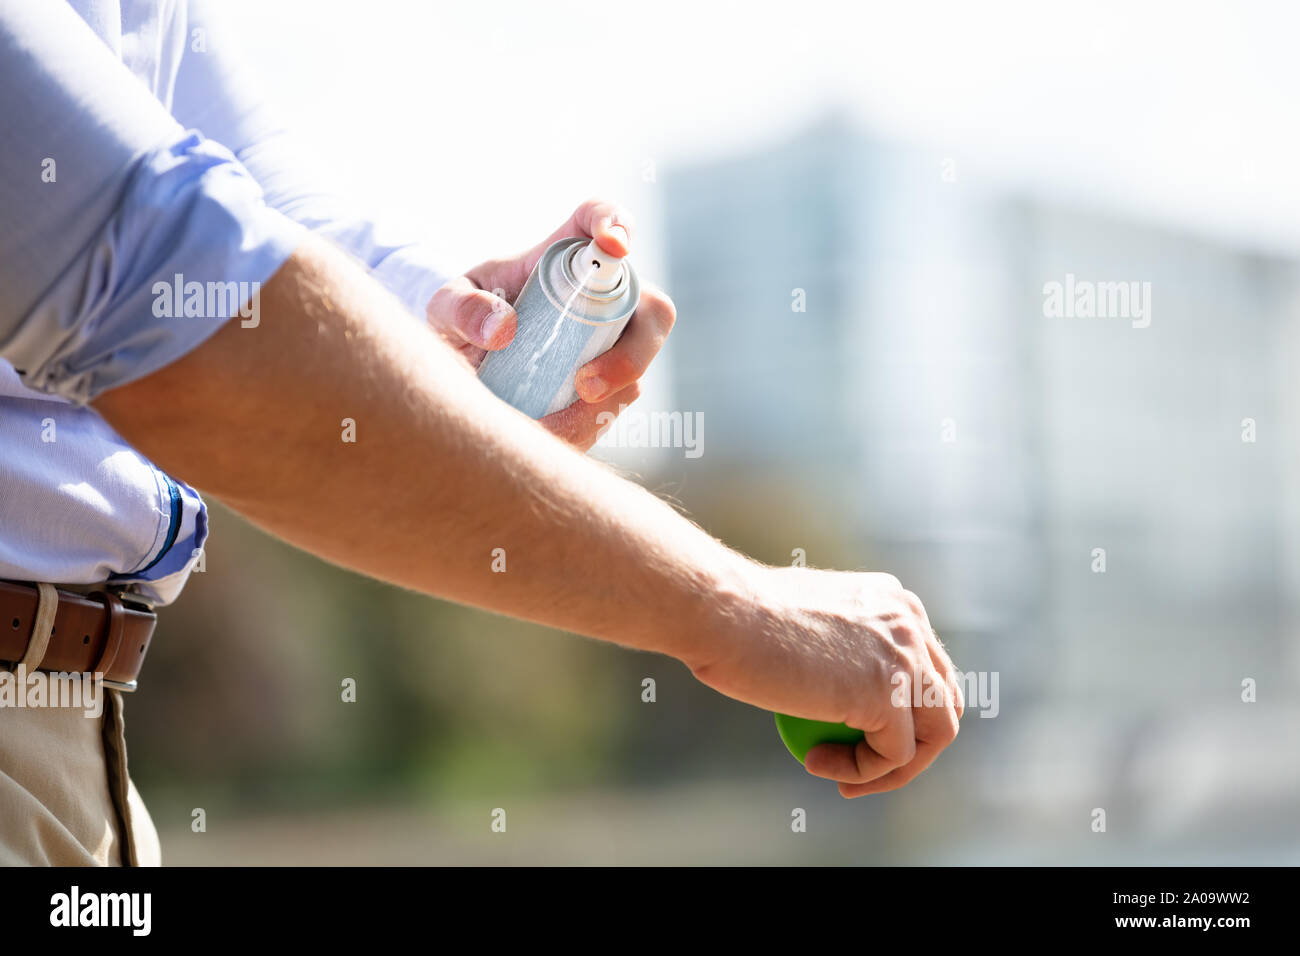 Man Spraying Anti Insect Deet Spray On Skin Over His Arm Outdoors Stock Photo